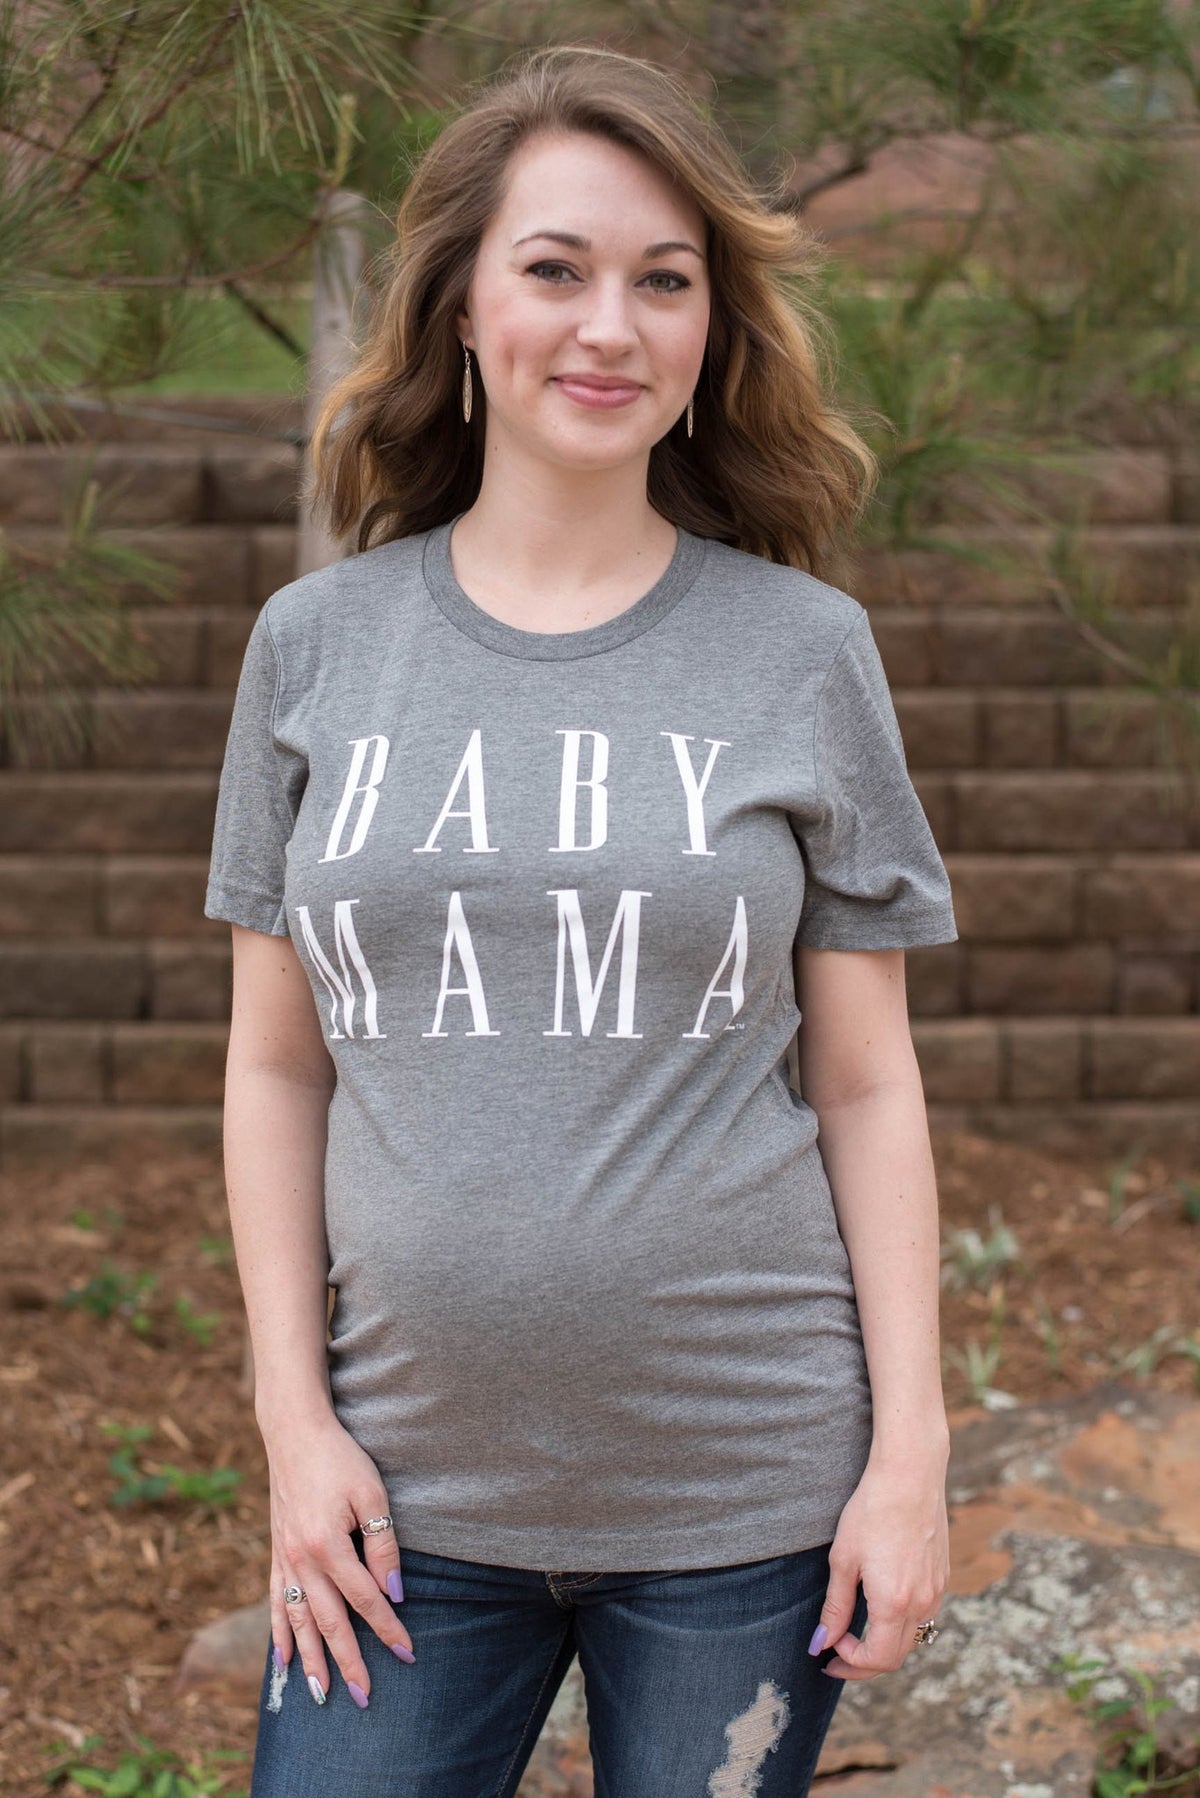 Baby Mama unisex short sleeve t-shirt grey - Stylish T-shirts - Trendy Graphic T-Shirts and Tank Tops at Lush Fashion Lounge Boutique in Oklahoma City